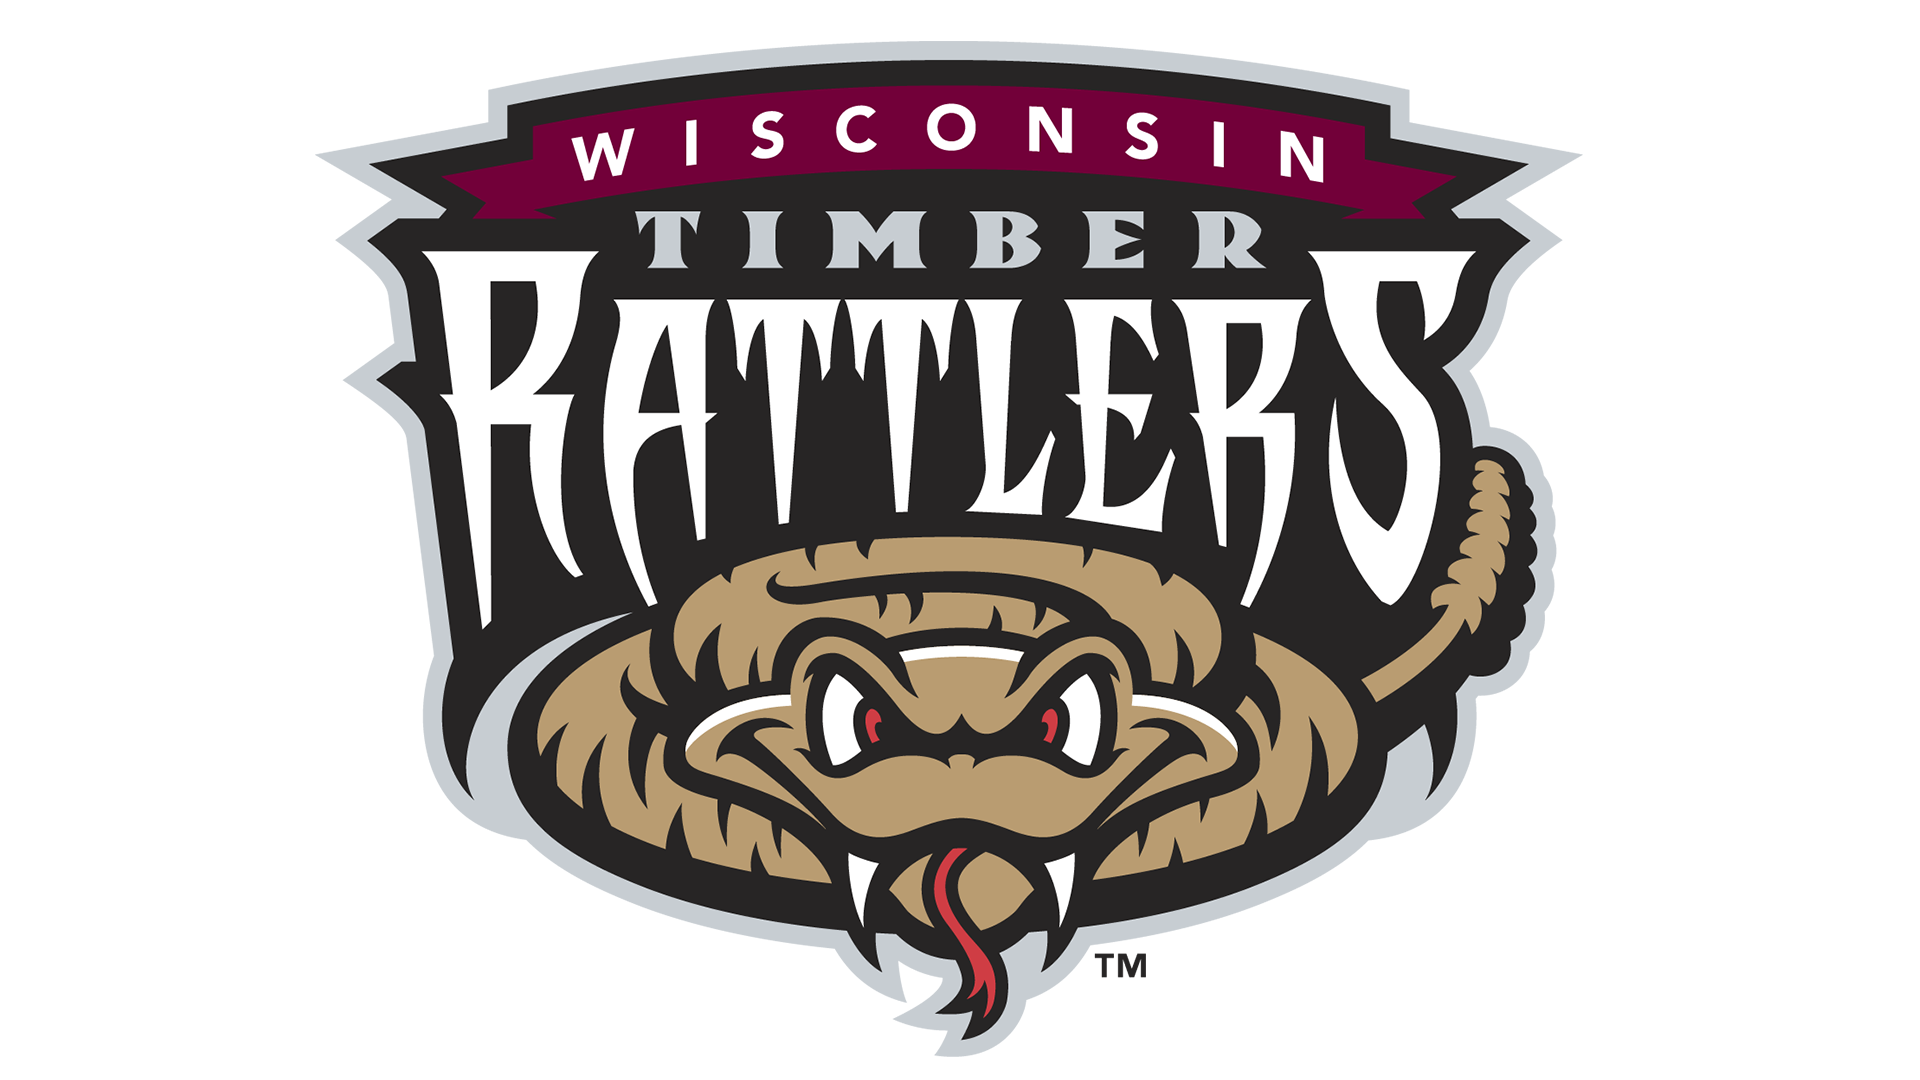 Wisconsin-Timber-Rattlers-Logo.png